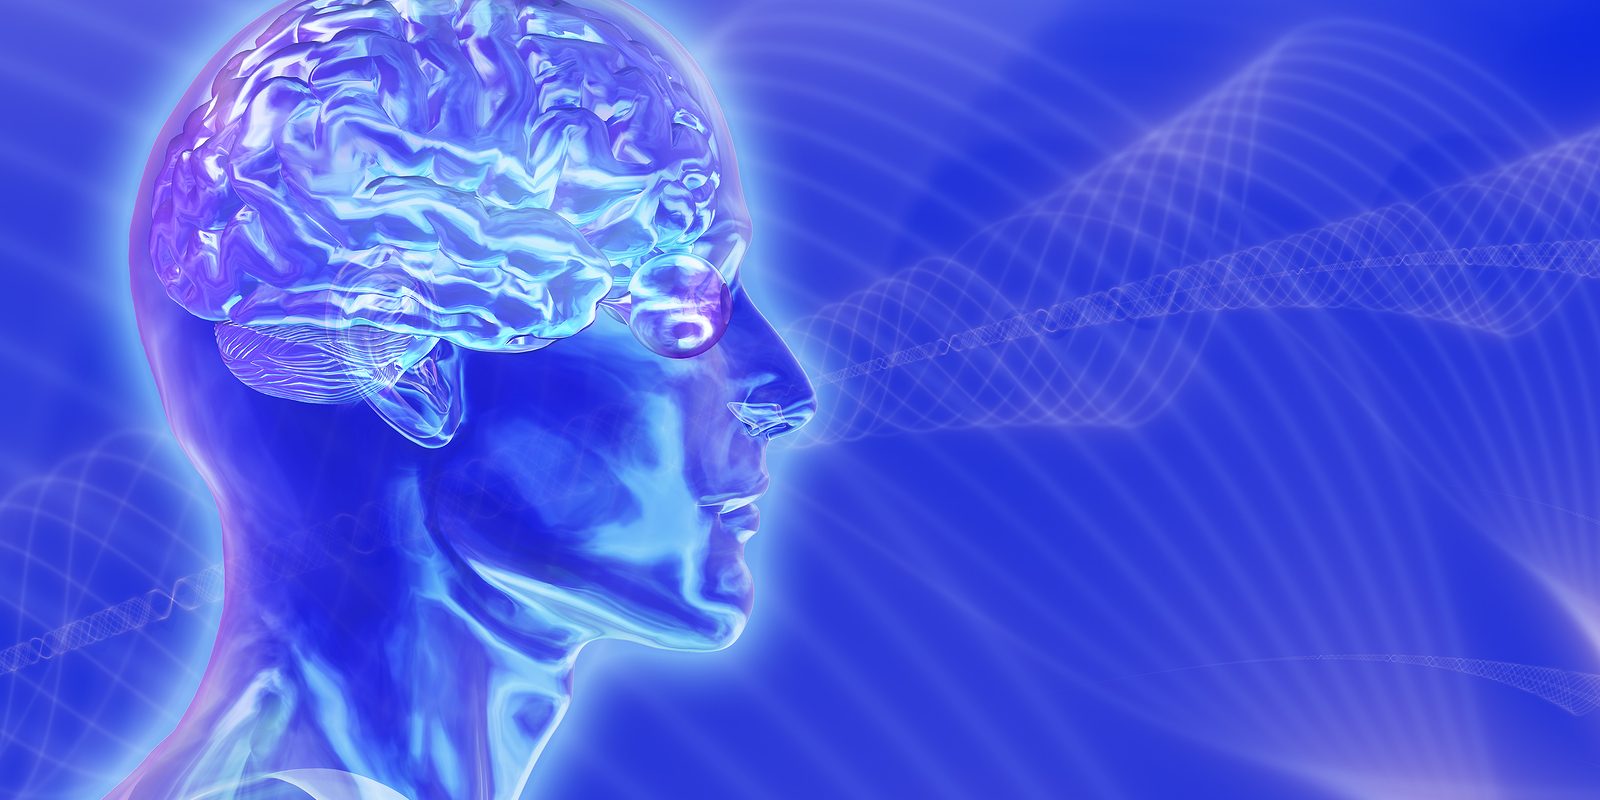 3D render of a glass head with the brain inside against a blue 'brainwaves' background.